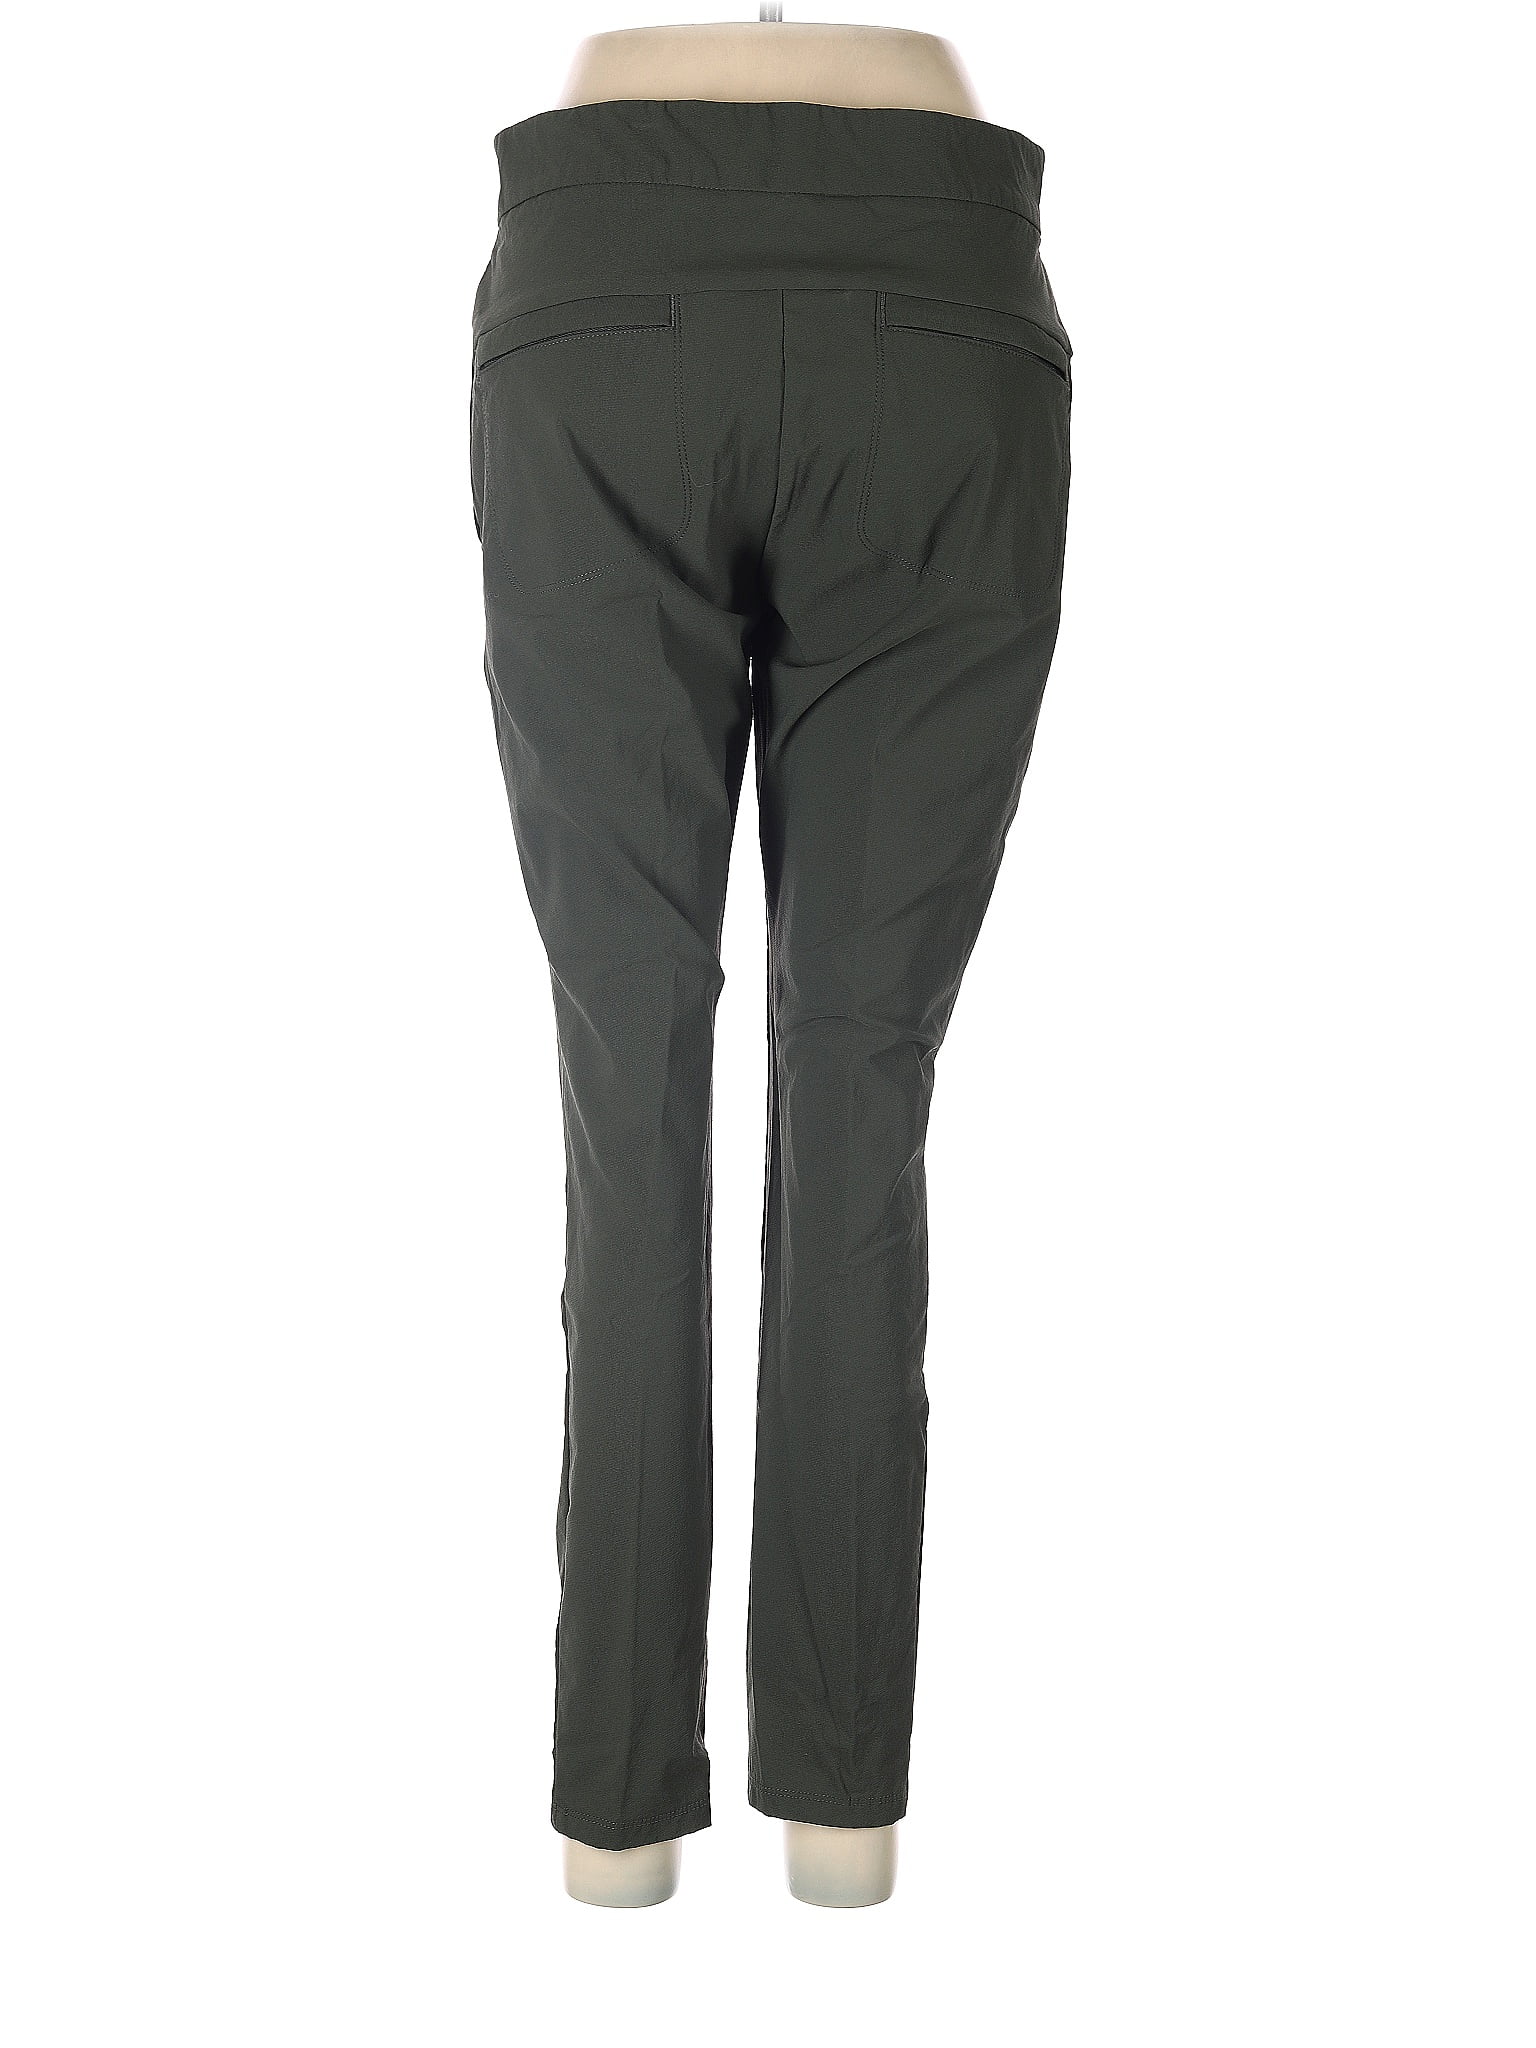 Athleta Solid Green Casual Pants Size 8 (Petite) - 64% off